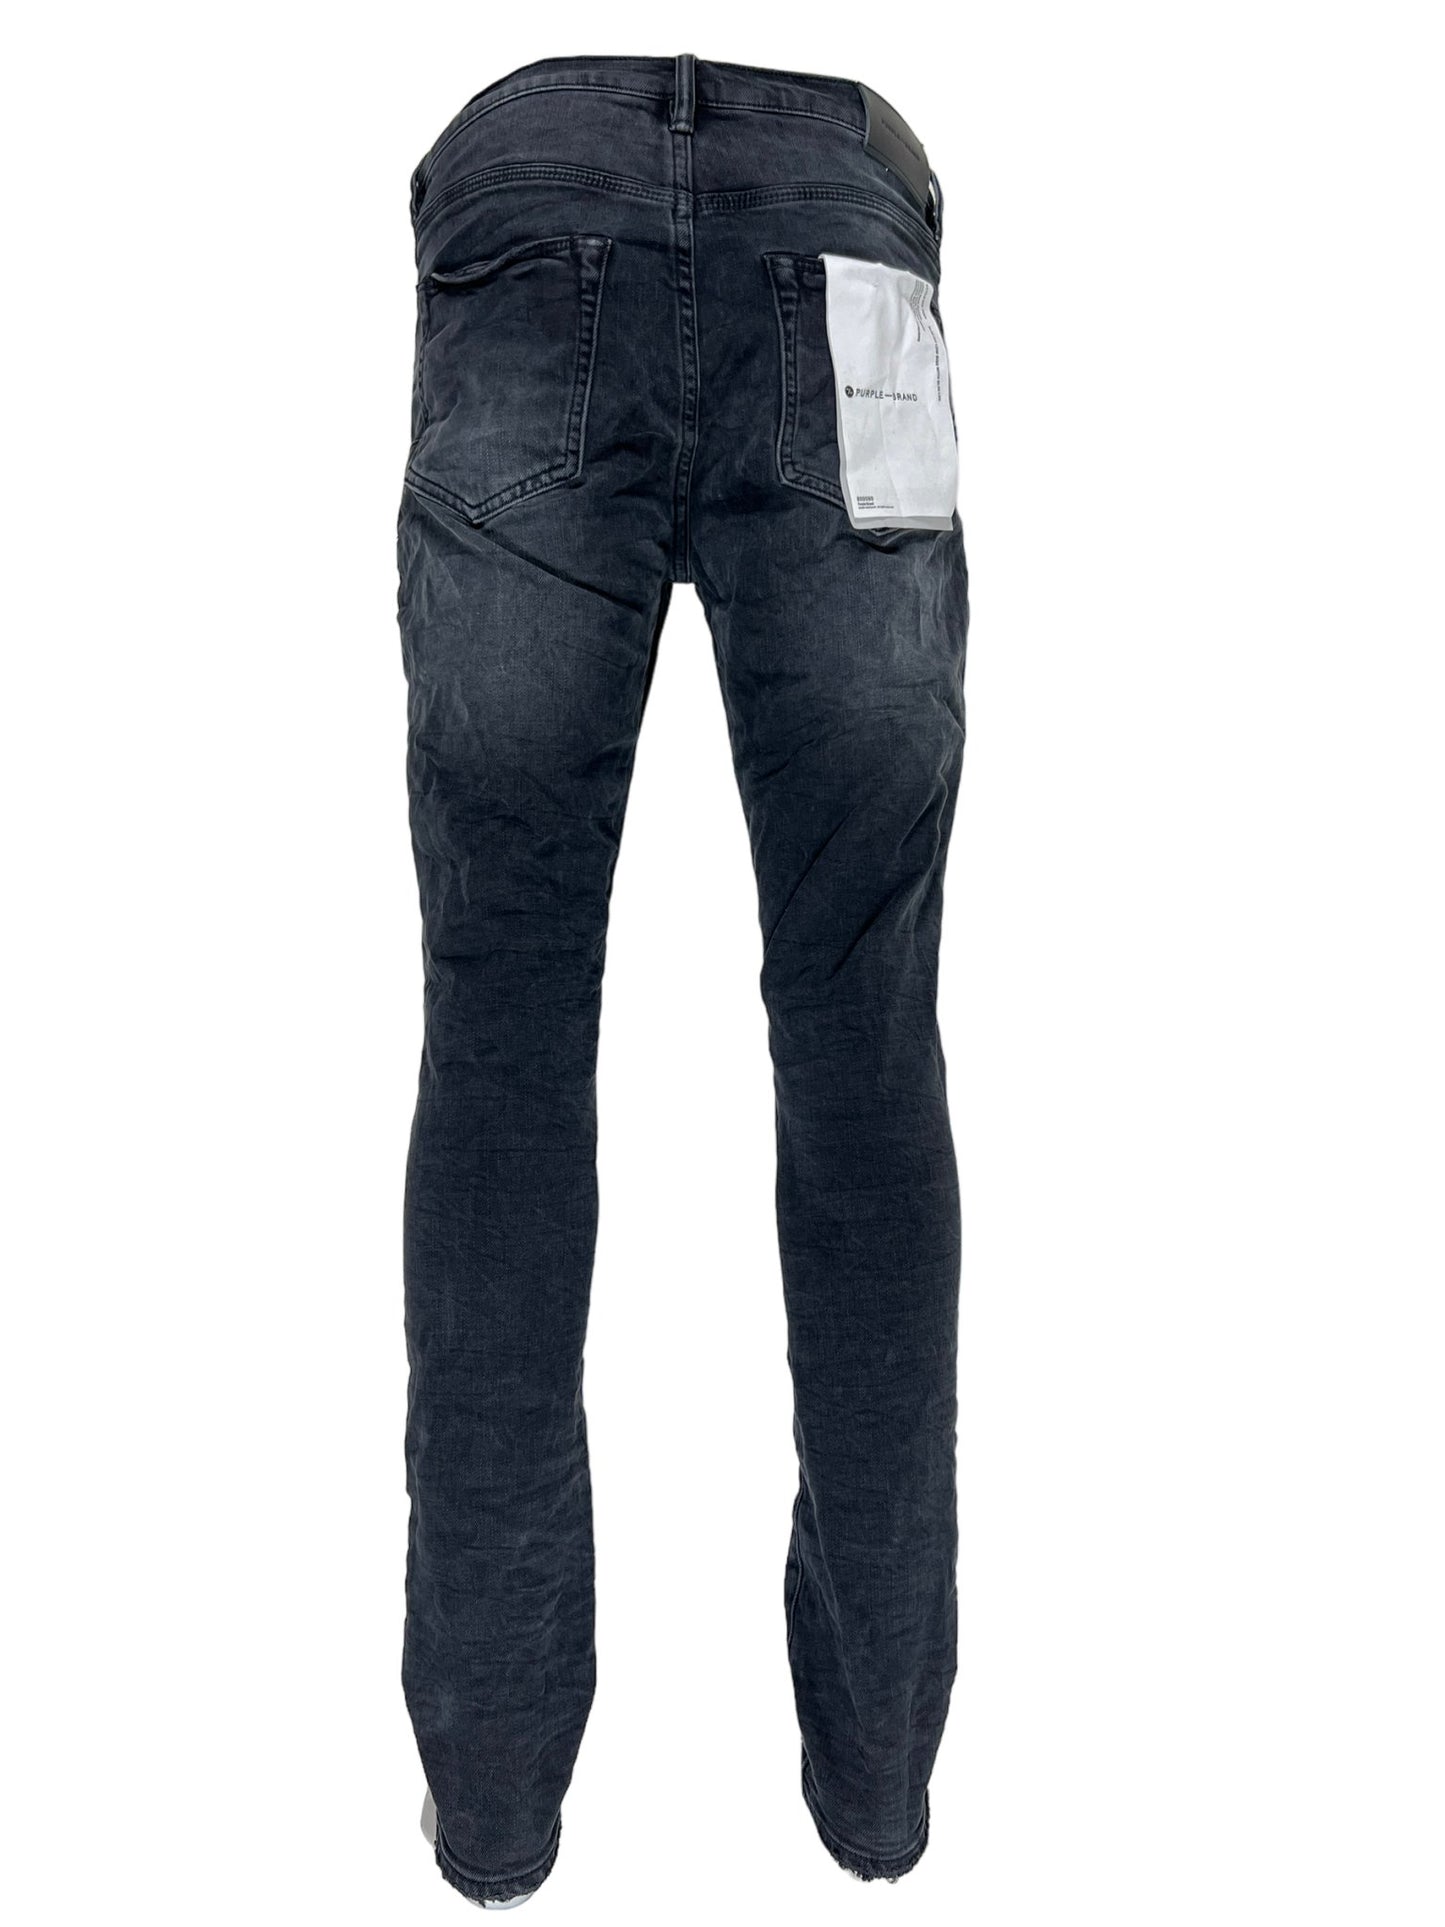 A pair of PURPLE BRAND men's skinny jeans with a pocket on the back.